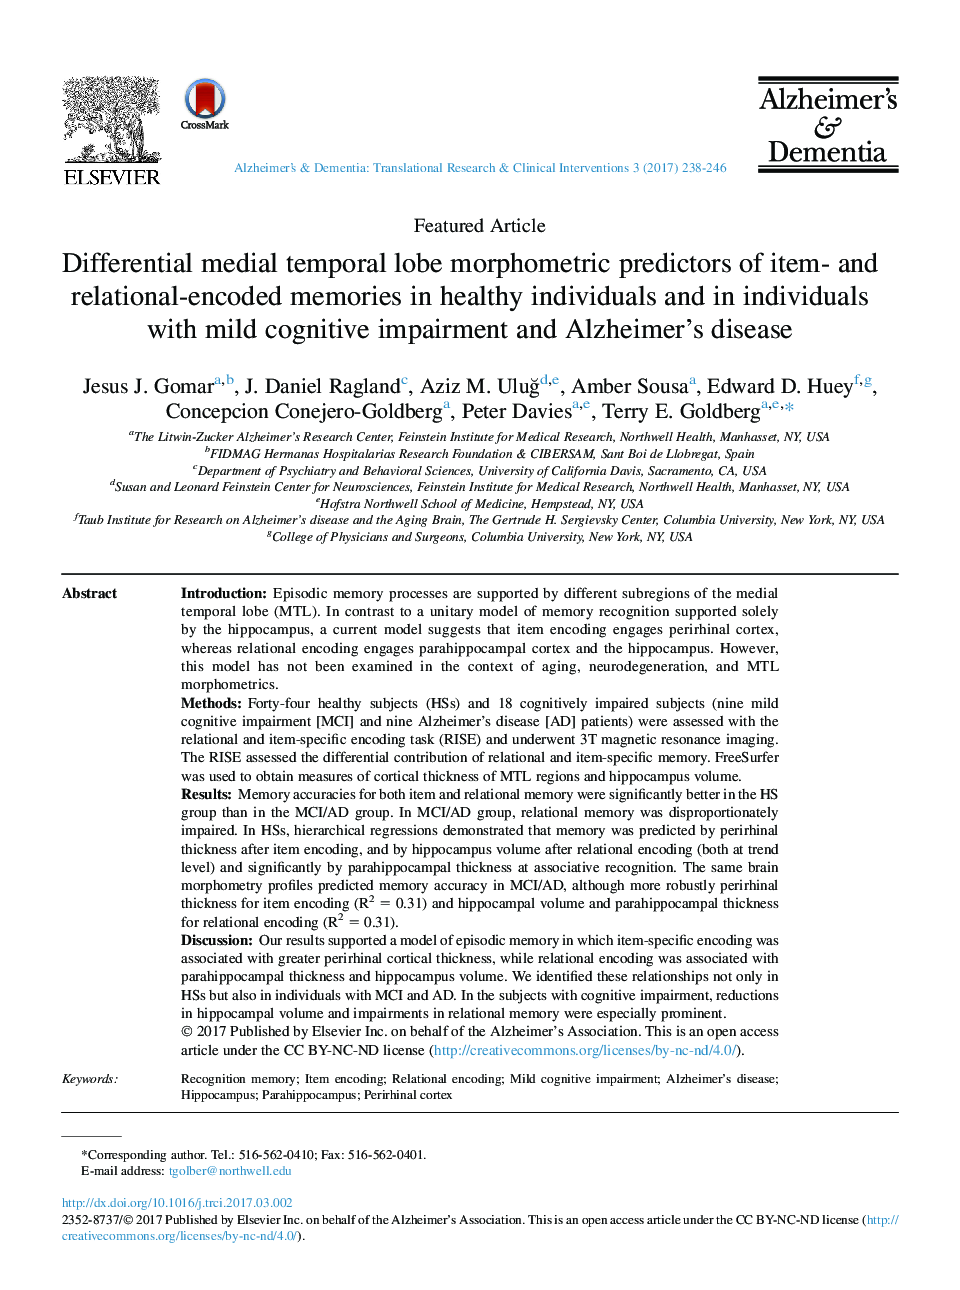 Differential medial temporal lobe morphometric predictors of item- and relational-encoded memories in healthy individuals and in individuals with mild cognitive impairment and Alzheimer's disease